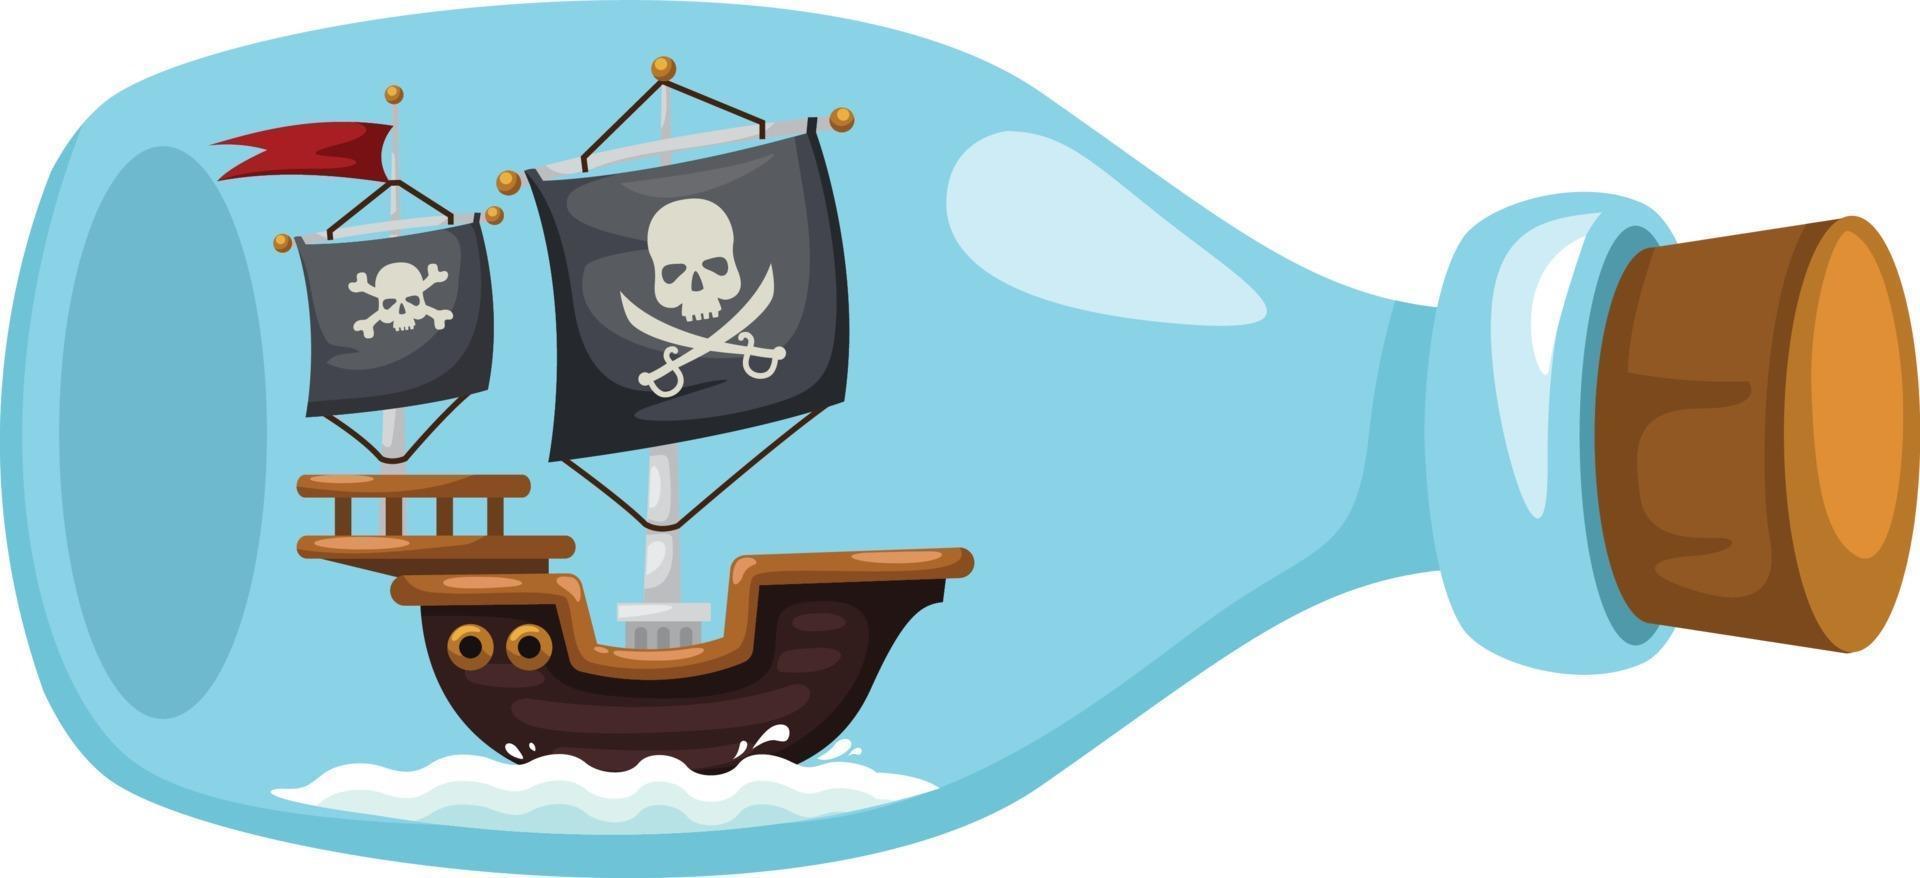 Pirate ship in bottle vector